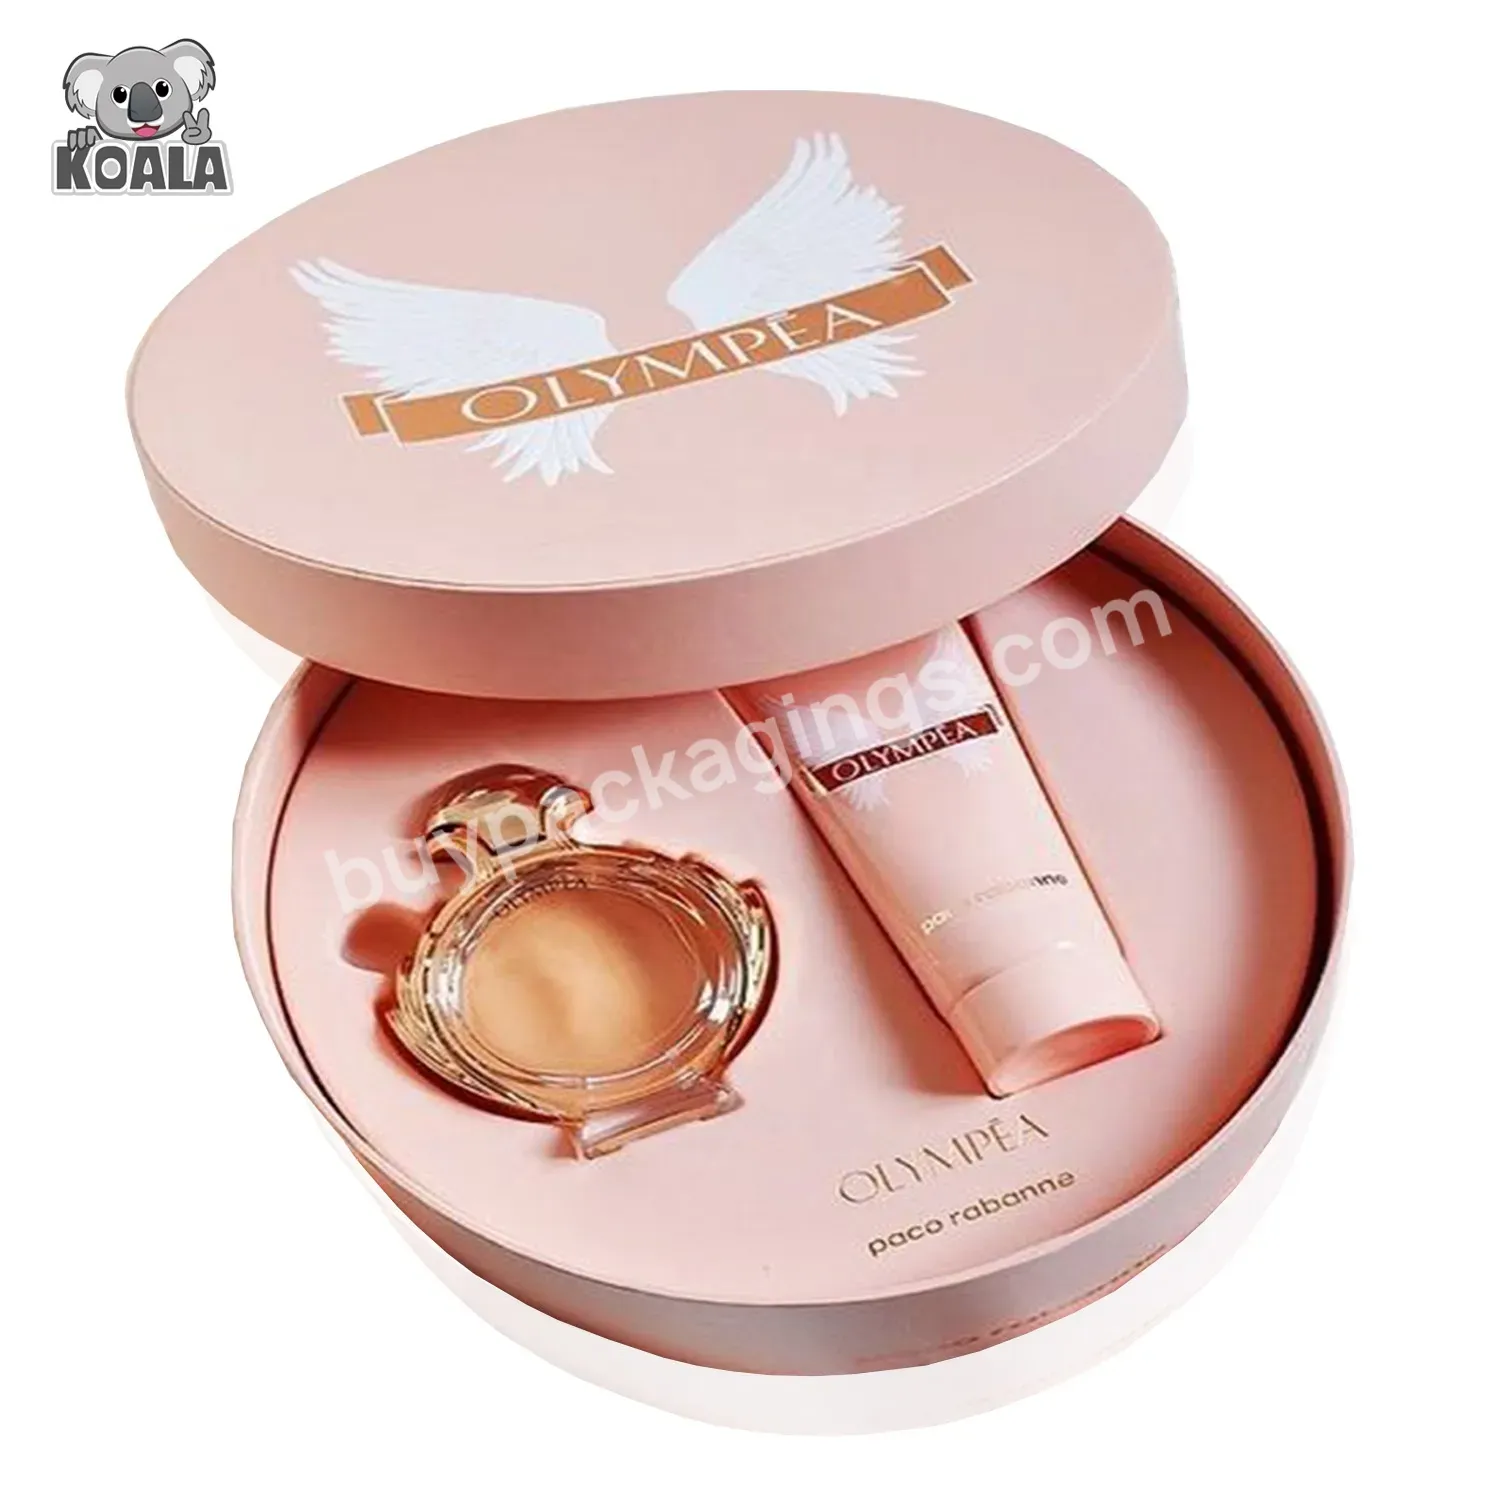 Luxury Girls And Women Pink Round Tube Paper Florist Floral Cosmetics Perfume Set Hat Gift Box